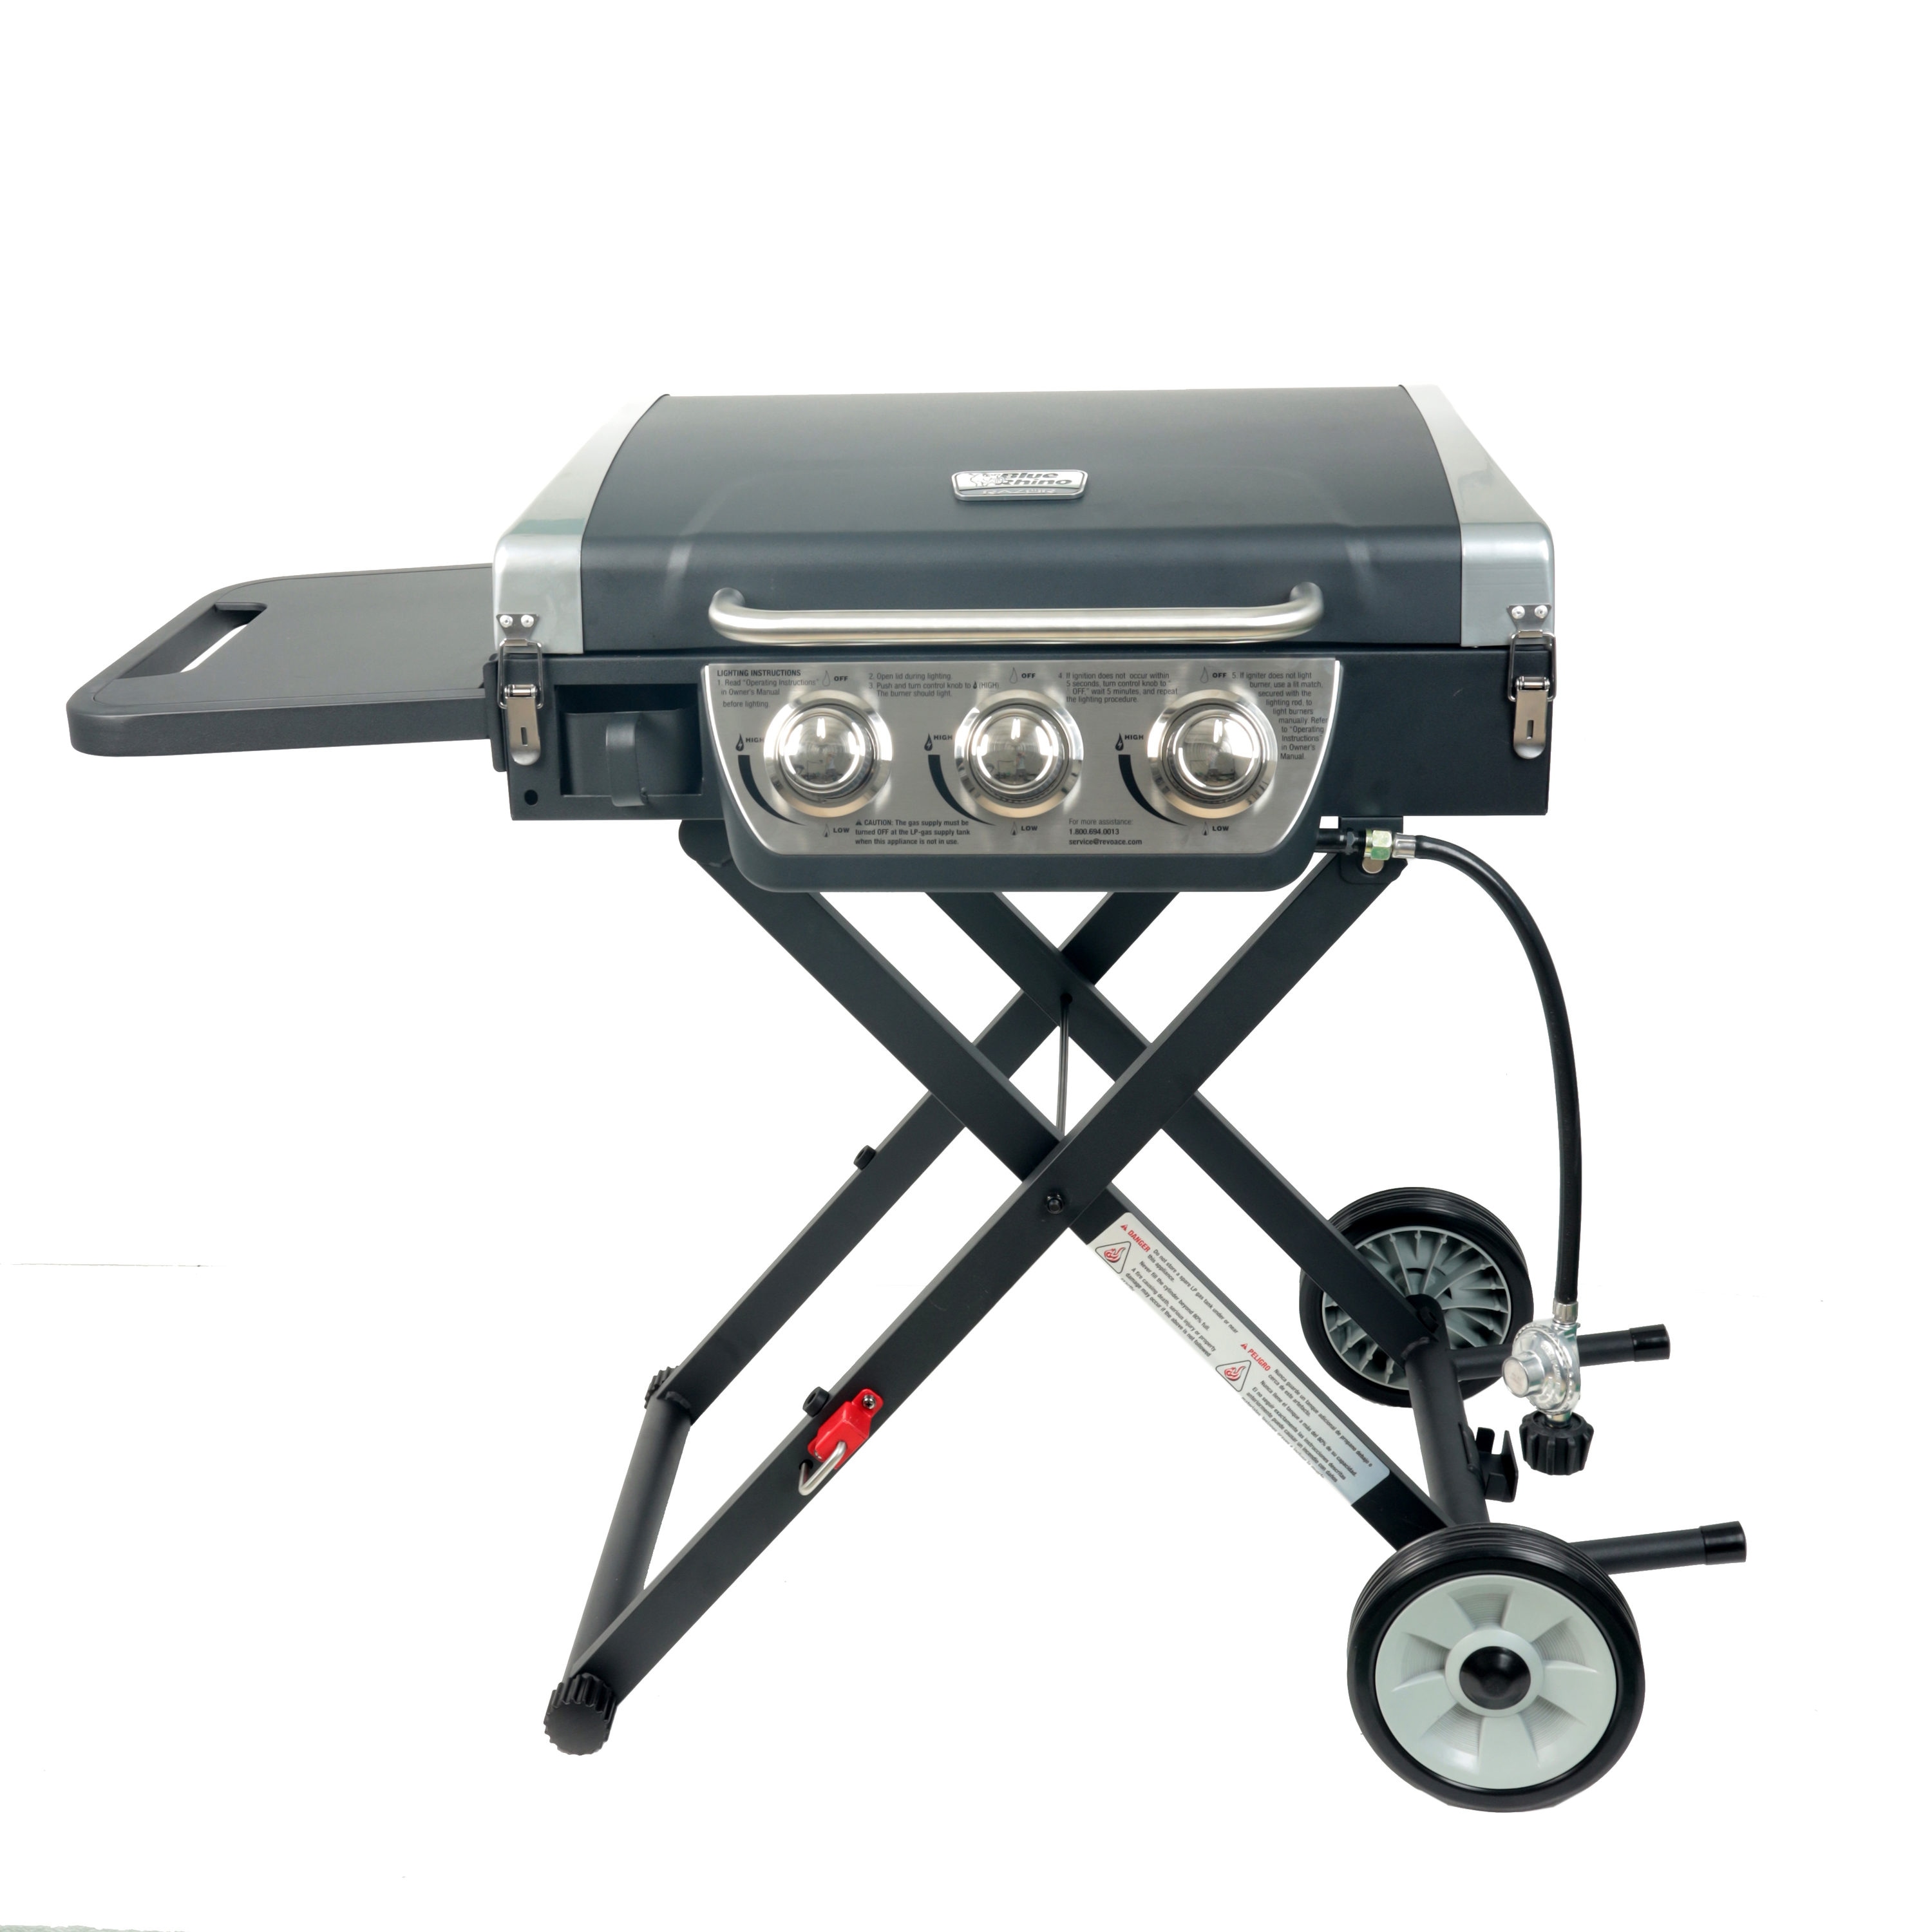 Razor 2-Burner Portable Propane Gas Griddle with Lid and Folding Cart